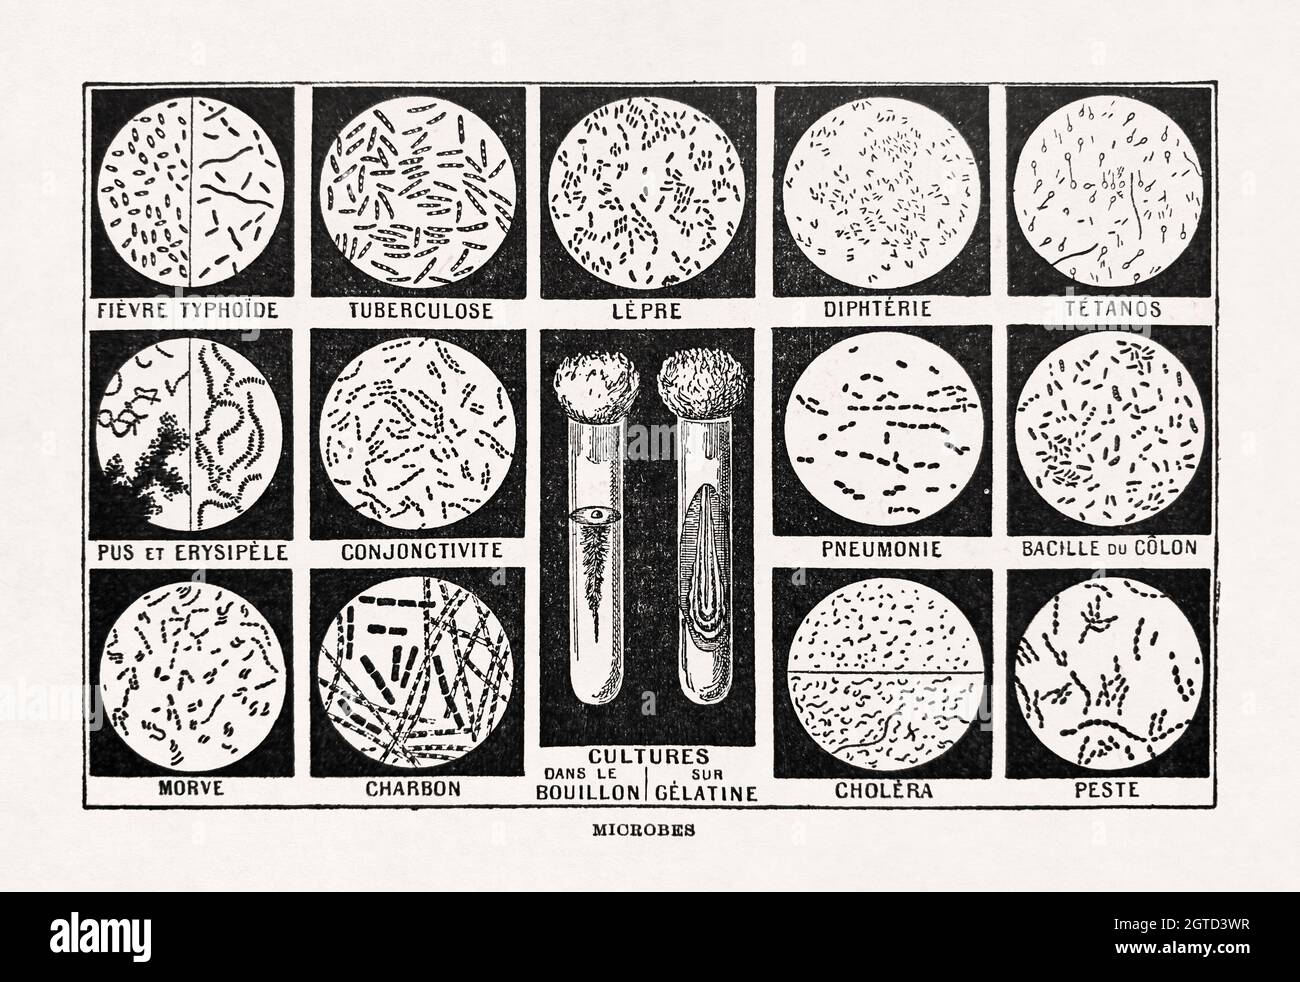 Old illustration about the microbes printed in the french dictionary 'Dictionnaire complet illustré' by the editor Larousse in 1899. Stock Photo